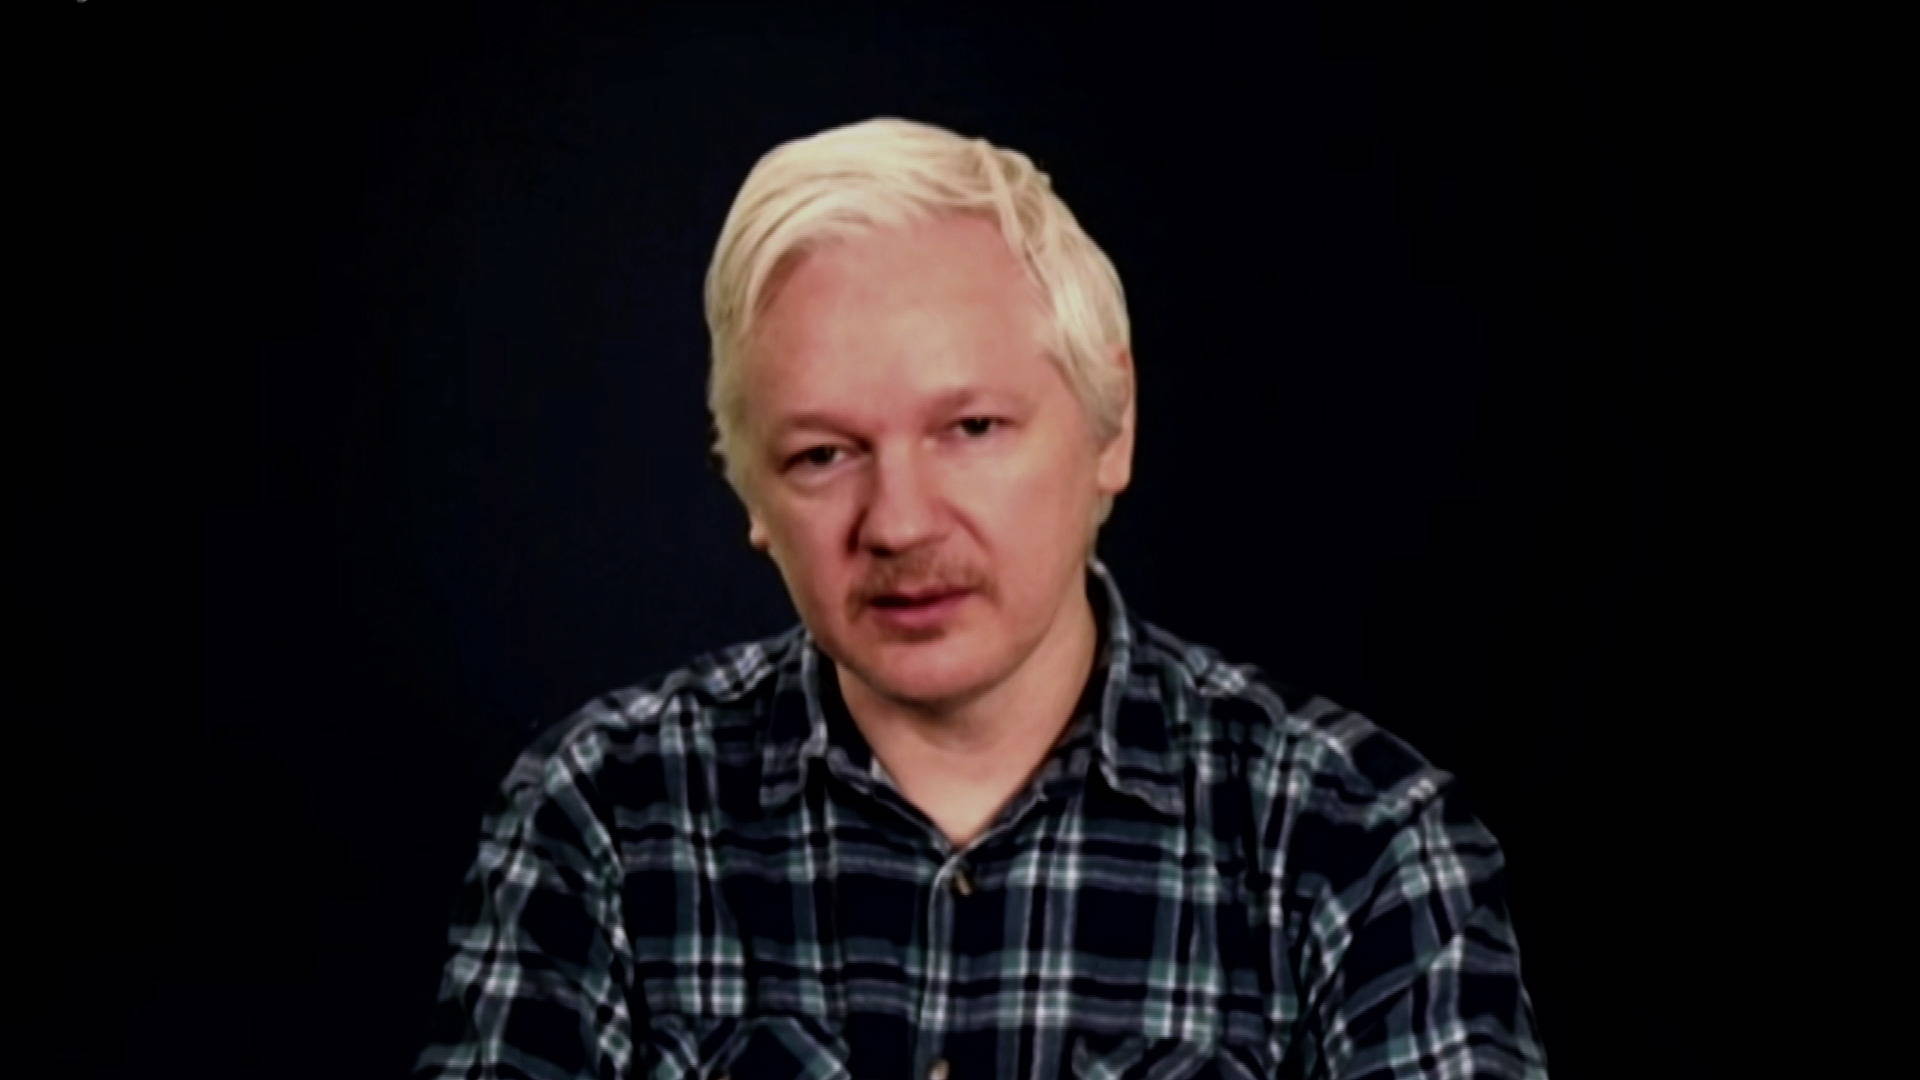 Julian Assange is A Political Prisoner Who Has Exposed 